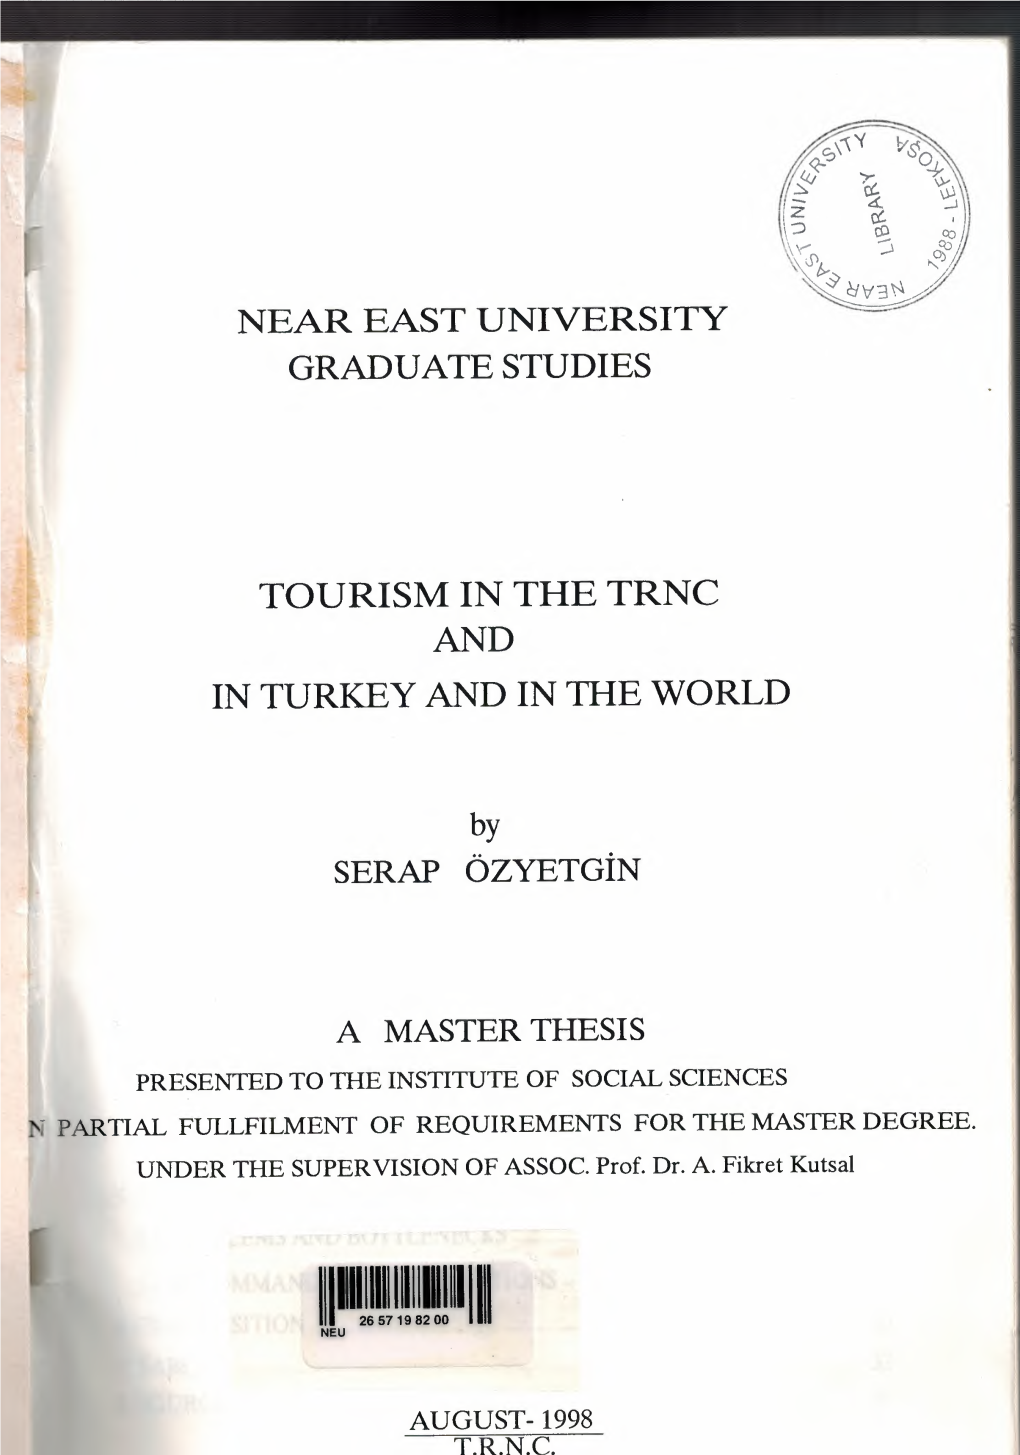 TOURISM in the TRNC By